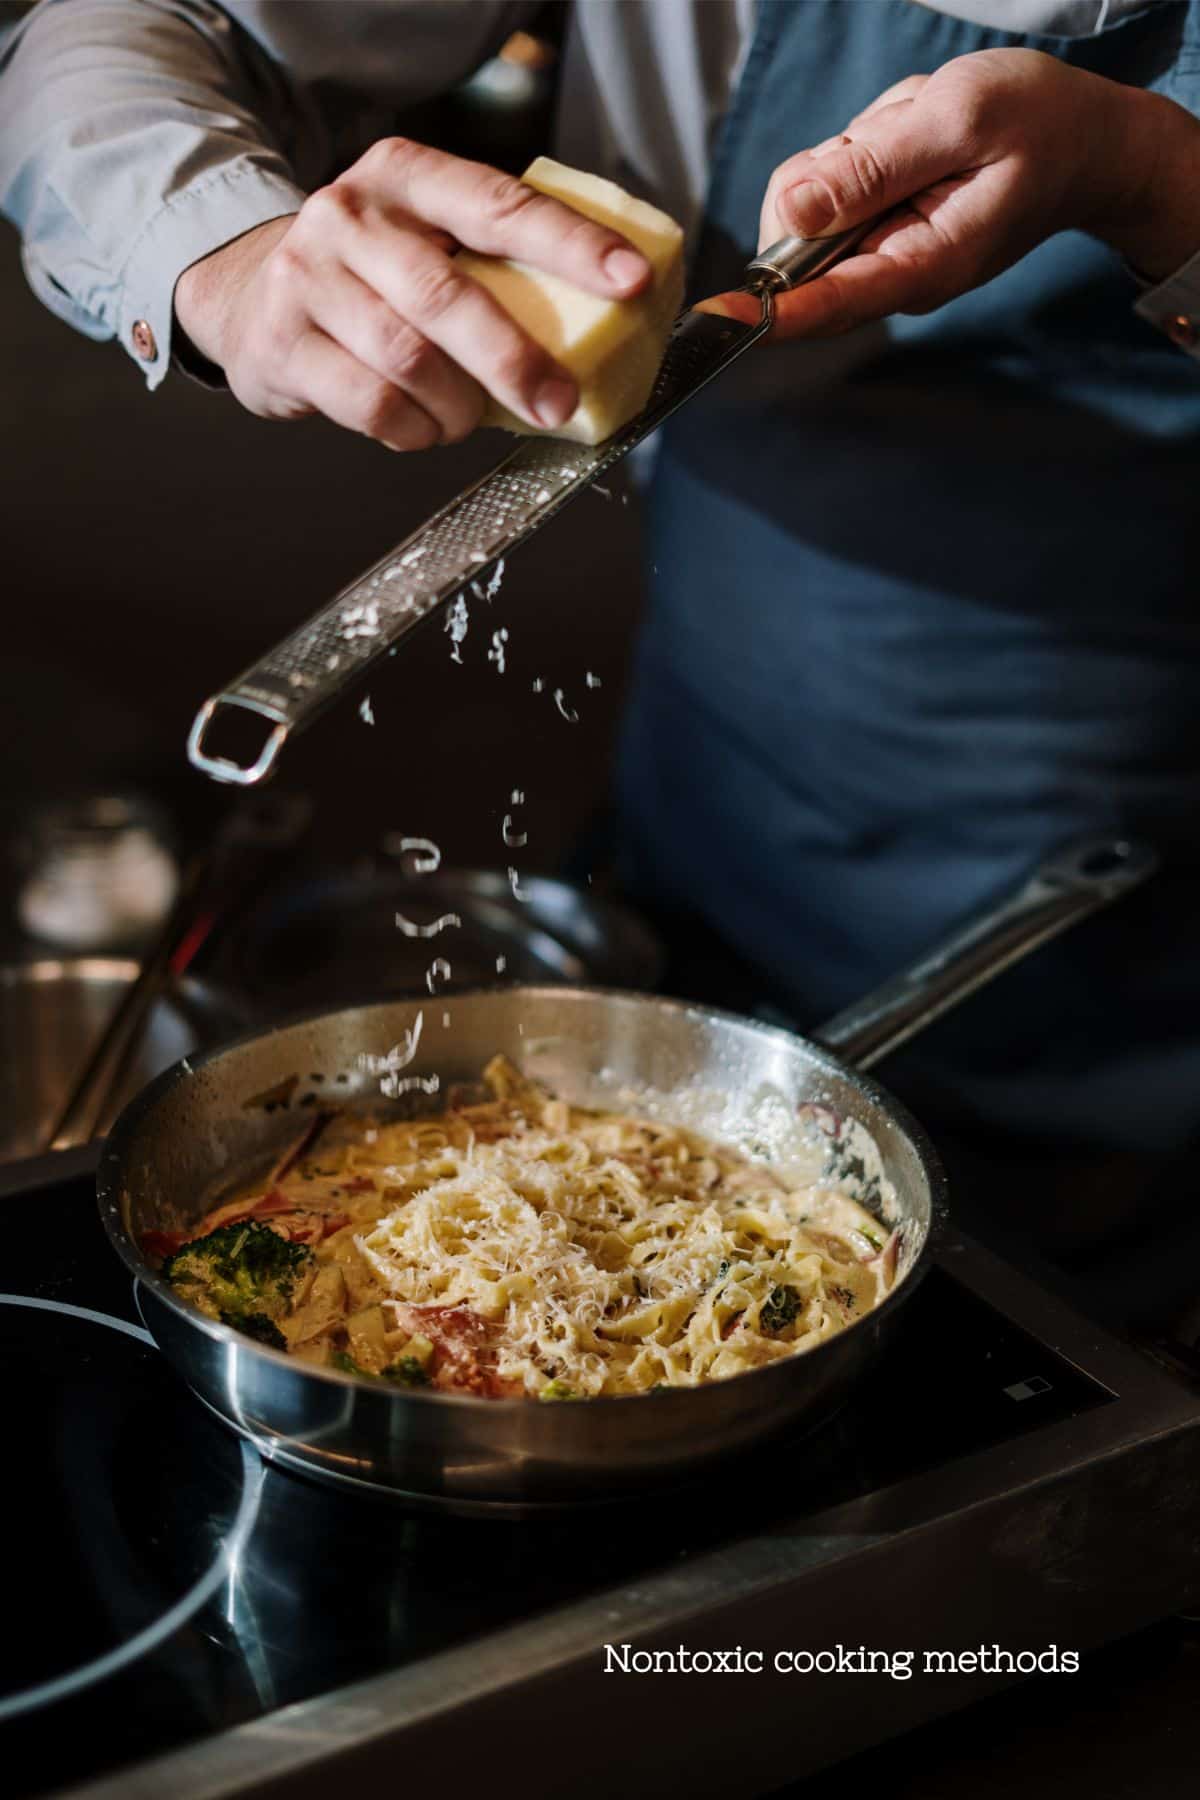 A chef grating cheese over a stainless steel pan with pasta, symbolizing non-toxic cooking methods and kitchen safety